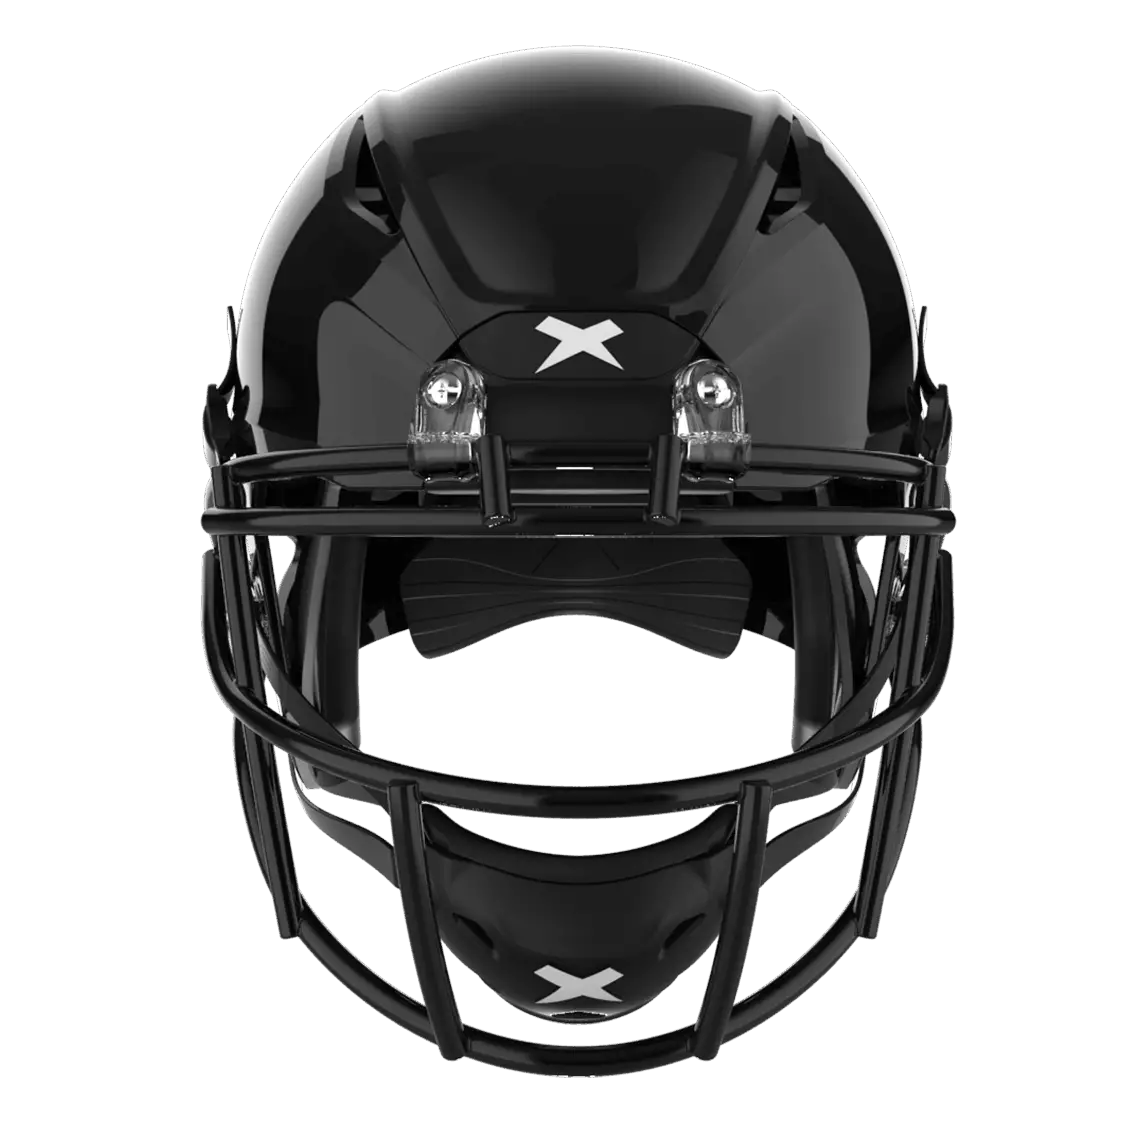 Shadow football helmet with black shell and black Prime facemask from front diagonal.